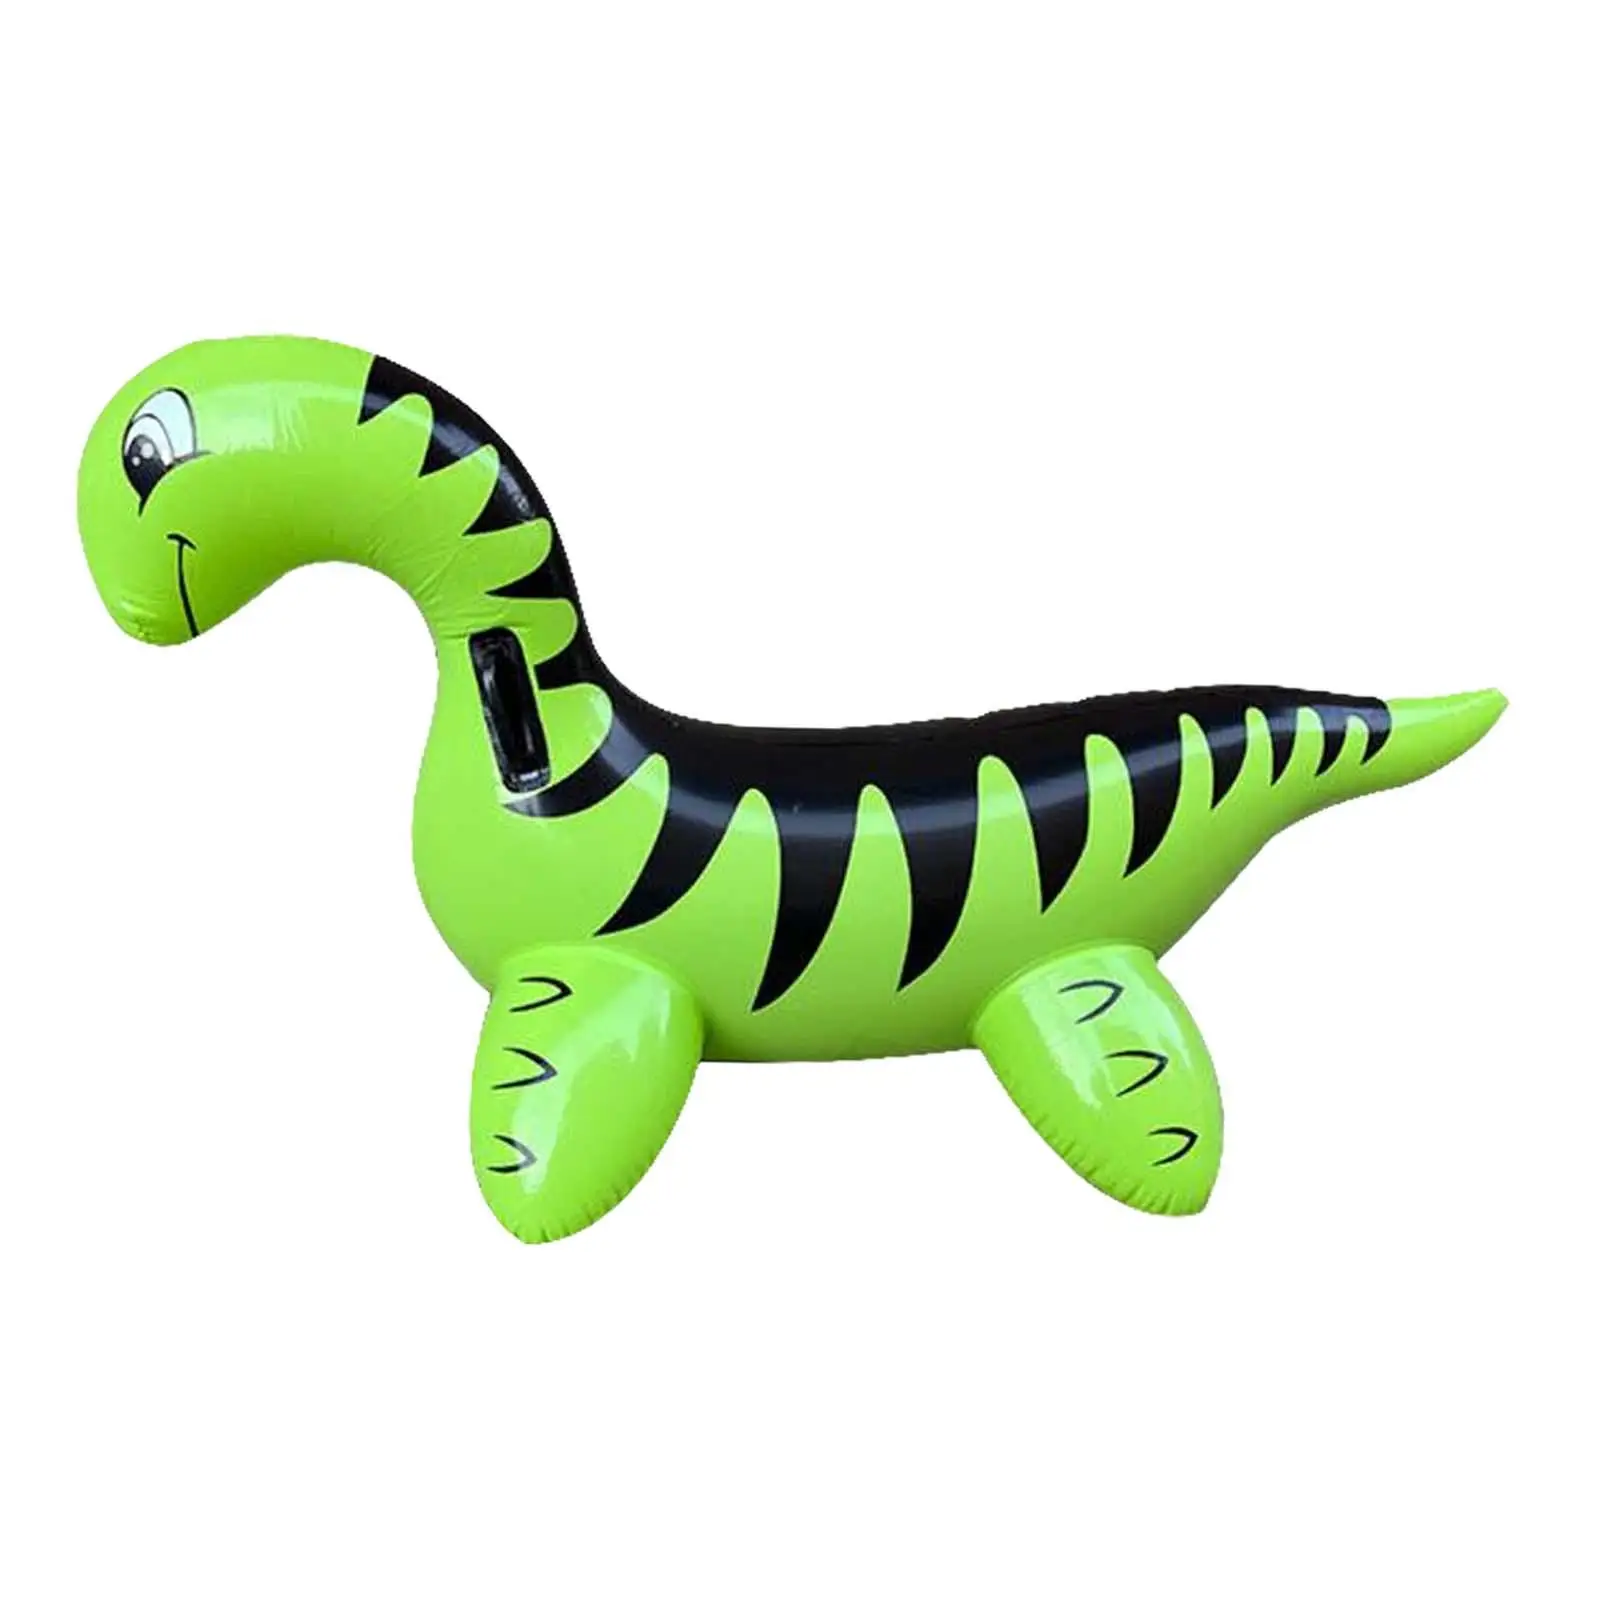 Dinosaur Pool Floats Water Games Lounge Toys Pool Toys Inflatable Swimming pool floats for Beach Party Swimming gifts Adults